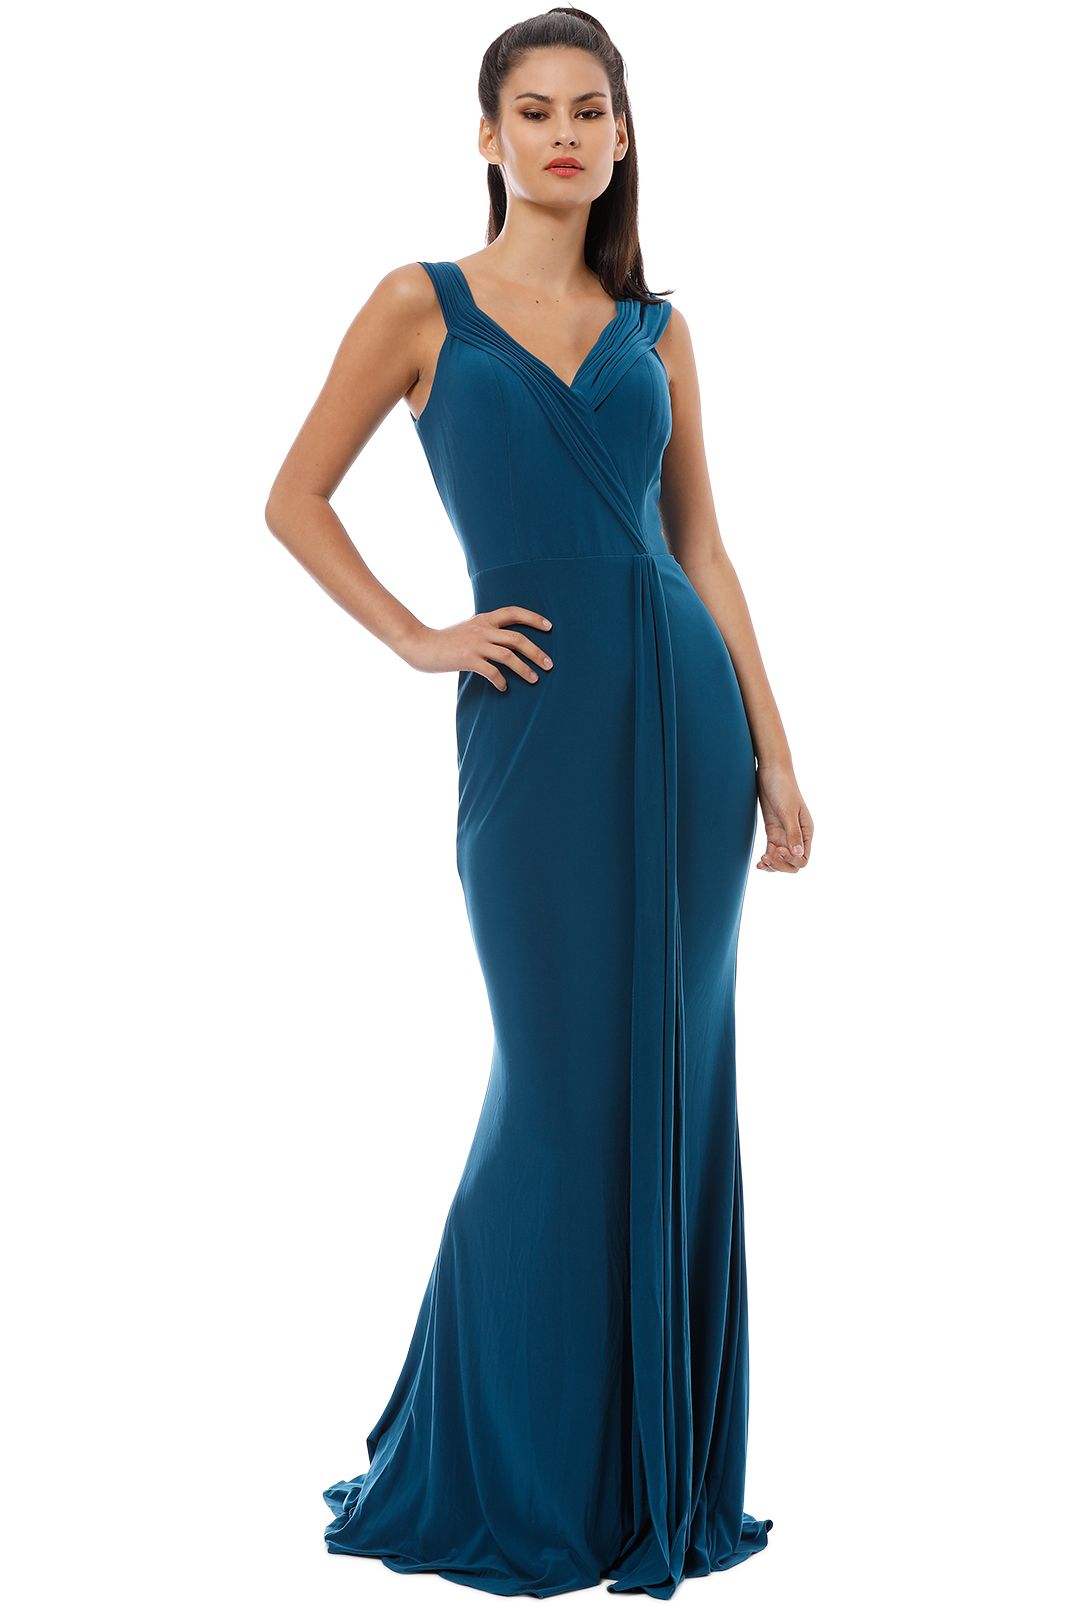 Tania Olsen - Malissa Gown - Teal - Front